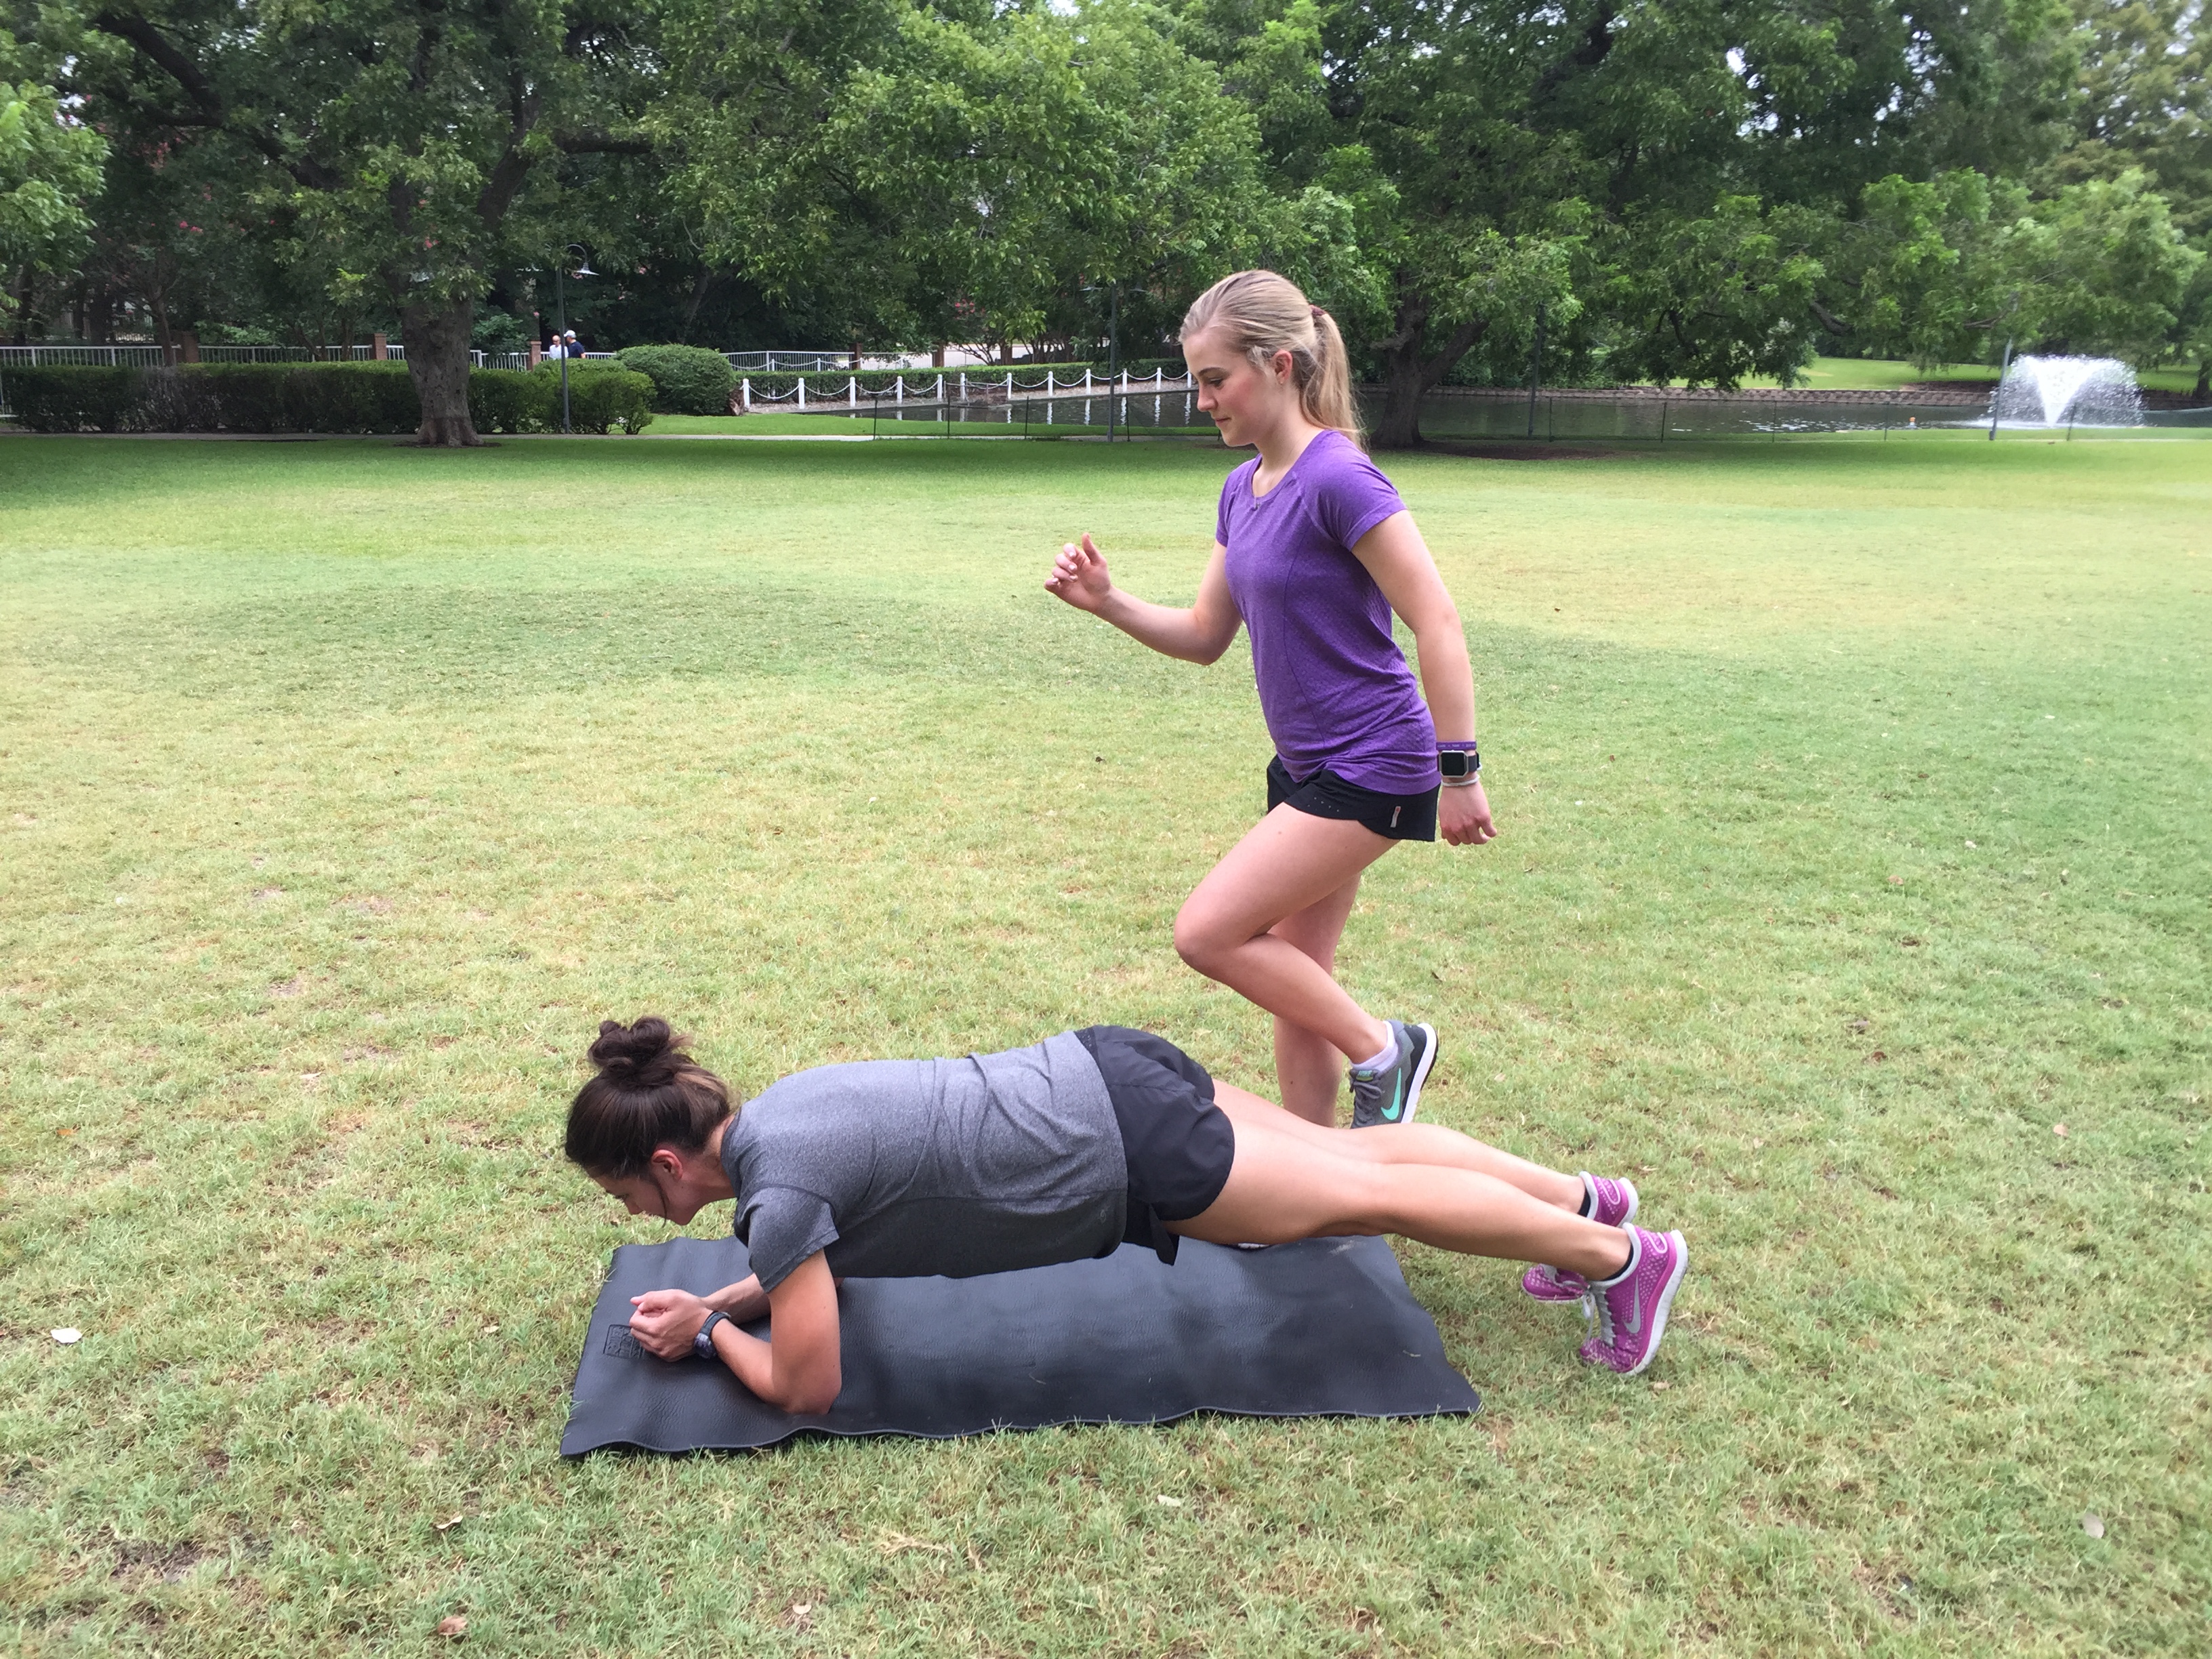 Two women doing a plank/lateral step exercise